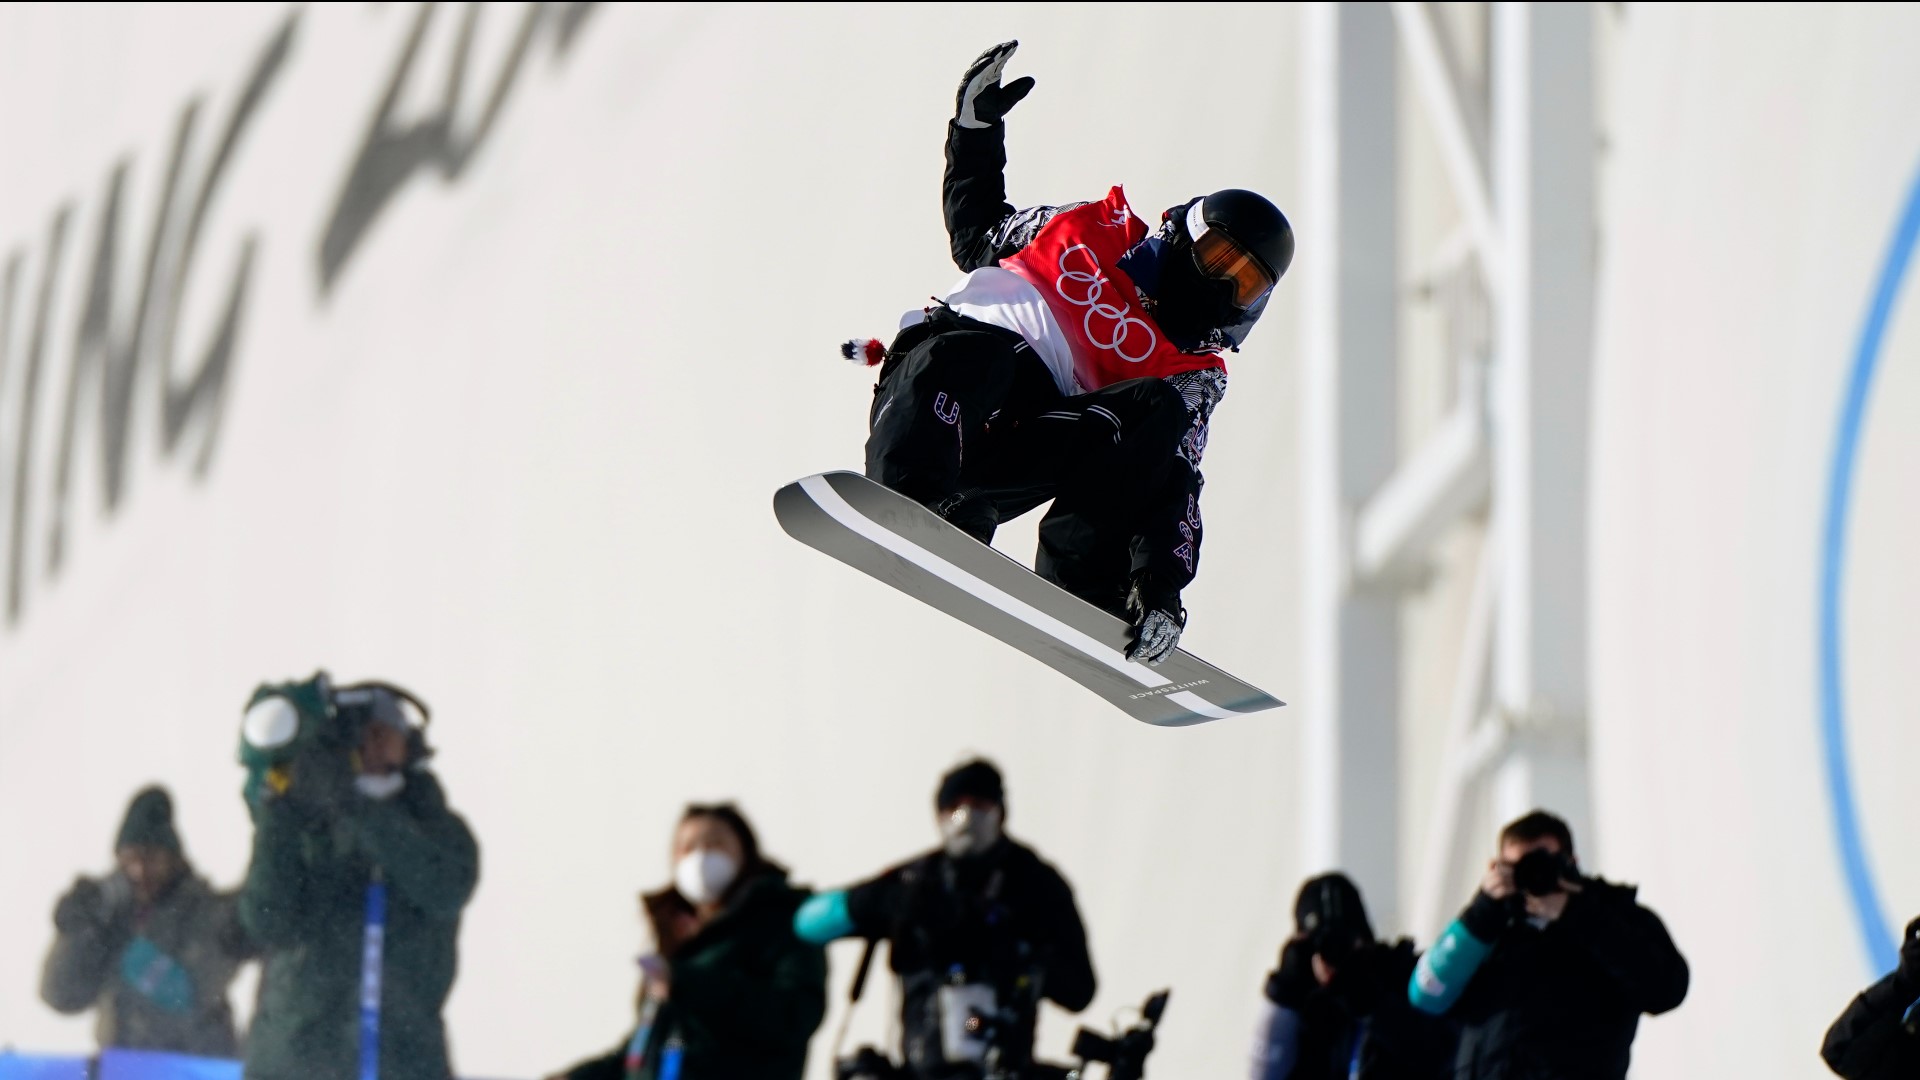 Watch the run that gave Shaun White his best score in the final of the 2022 Winter Olympics halfpipe before retirement.